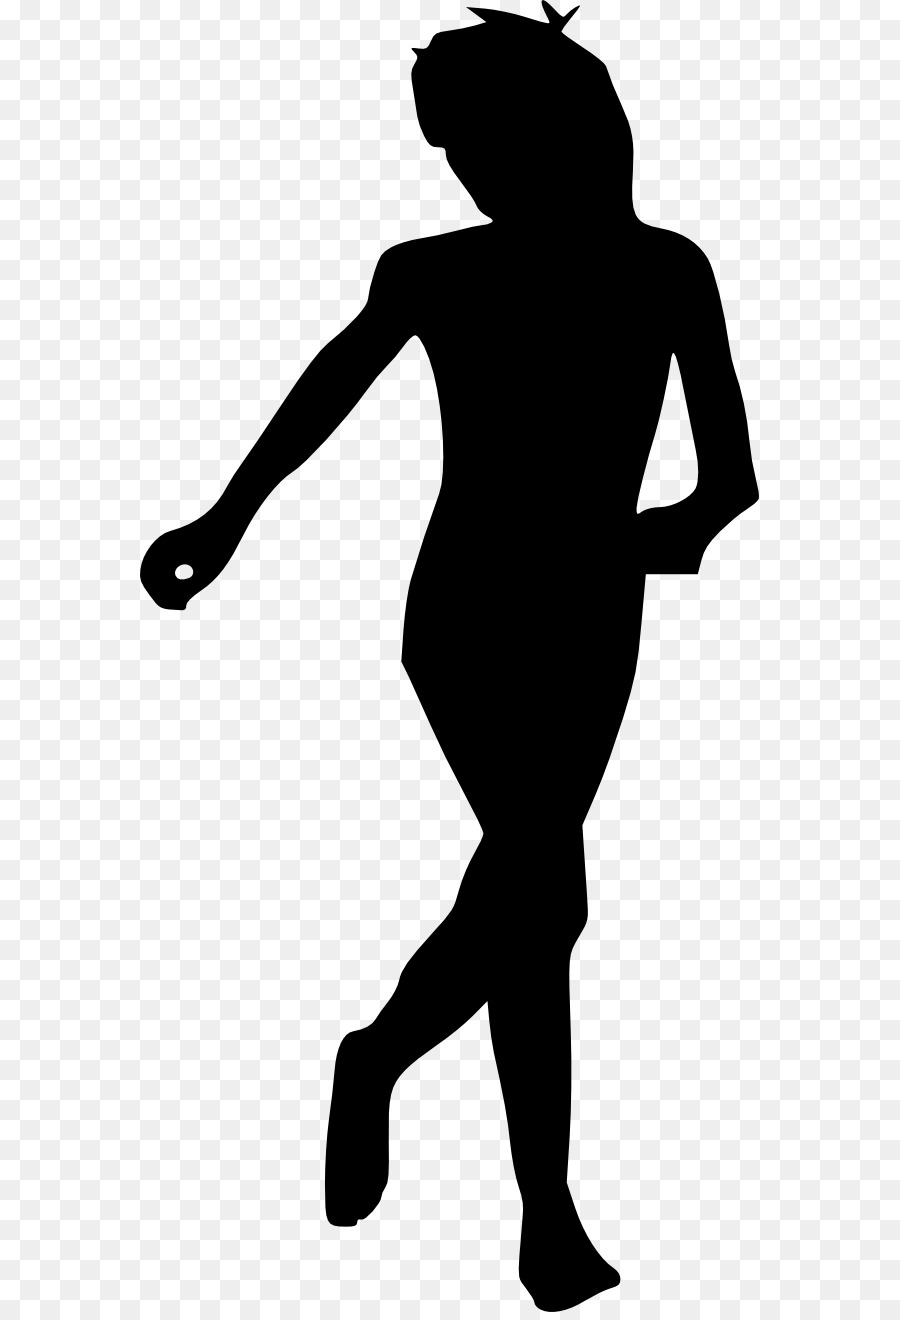 Silhouette Clip art - running man png download - 619*1312 - Free Transparent Silhouette png Download.